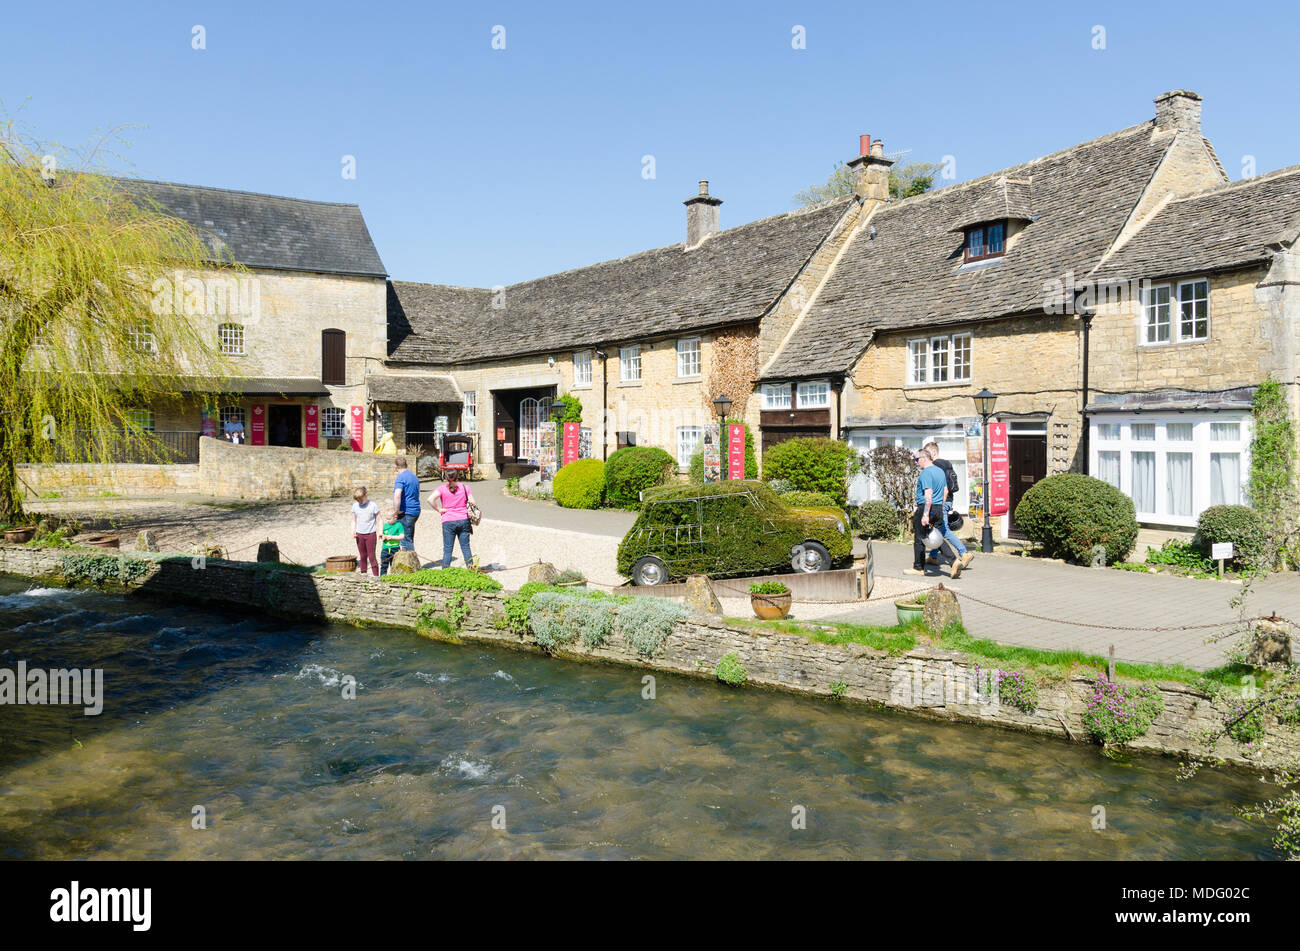 Cotswold fahrendes Museum im beliebten Cotswold Dorf Bourton-on-the-Water, Gloucestershire in der Frühlingssonne Stockfoto